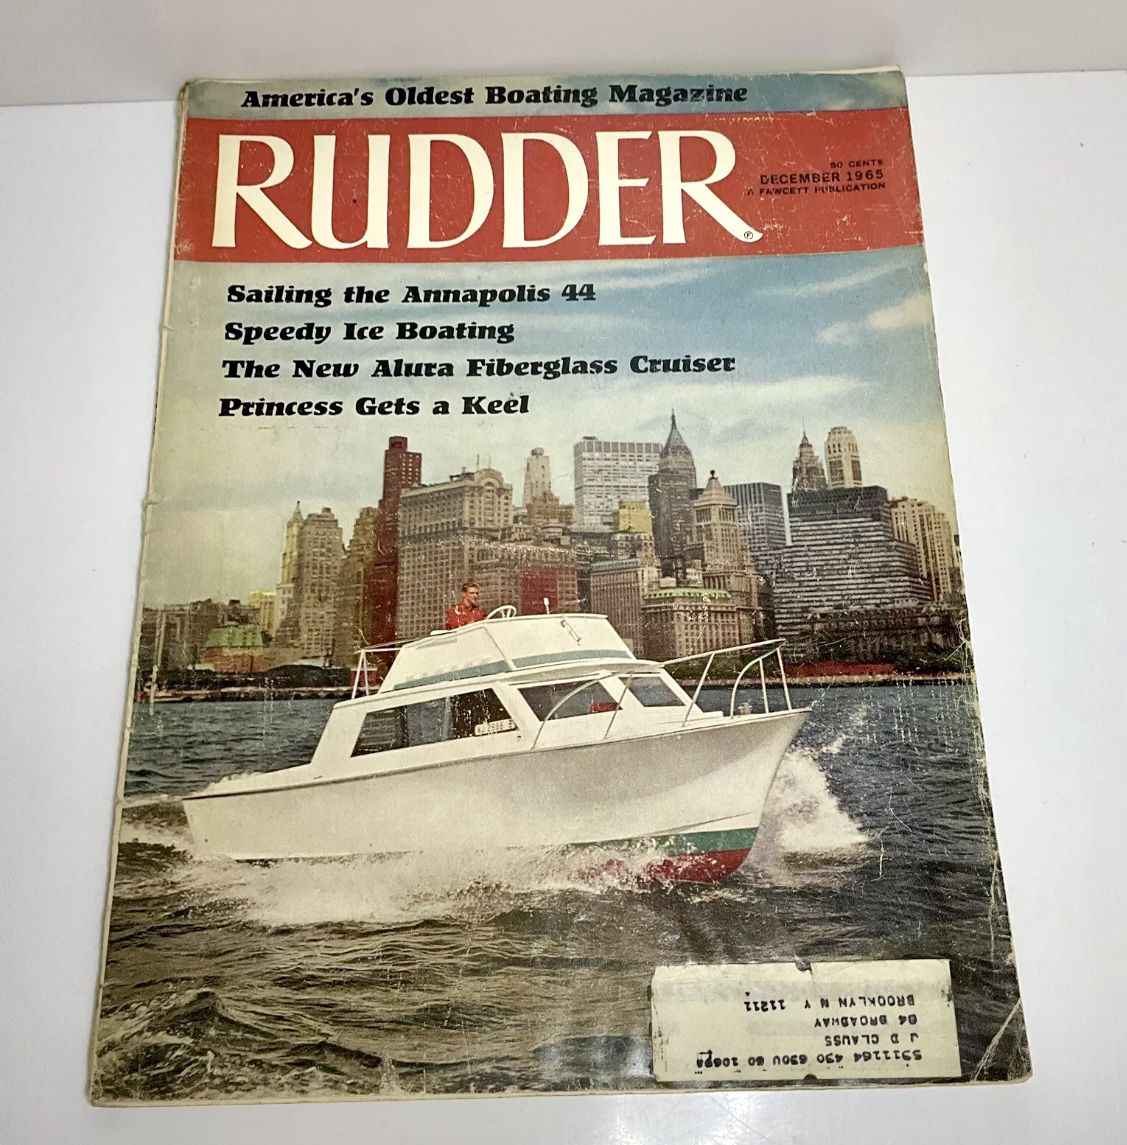 The Rudder America’s Oldest Boating Magazine December 1965 Boats Ships Yachts